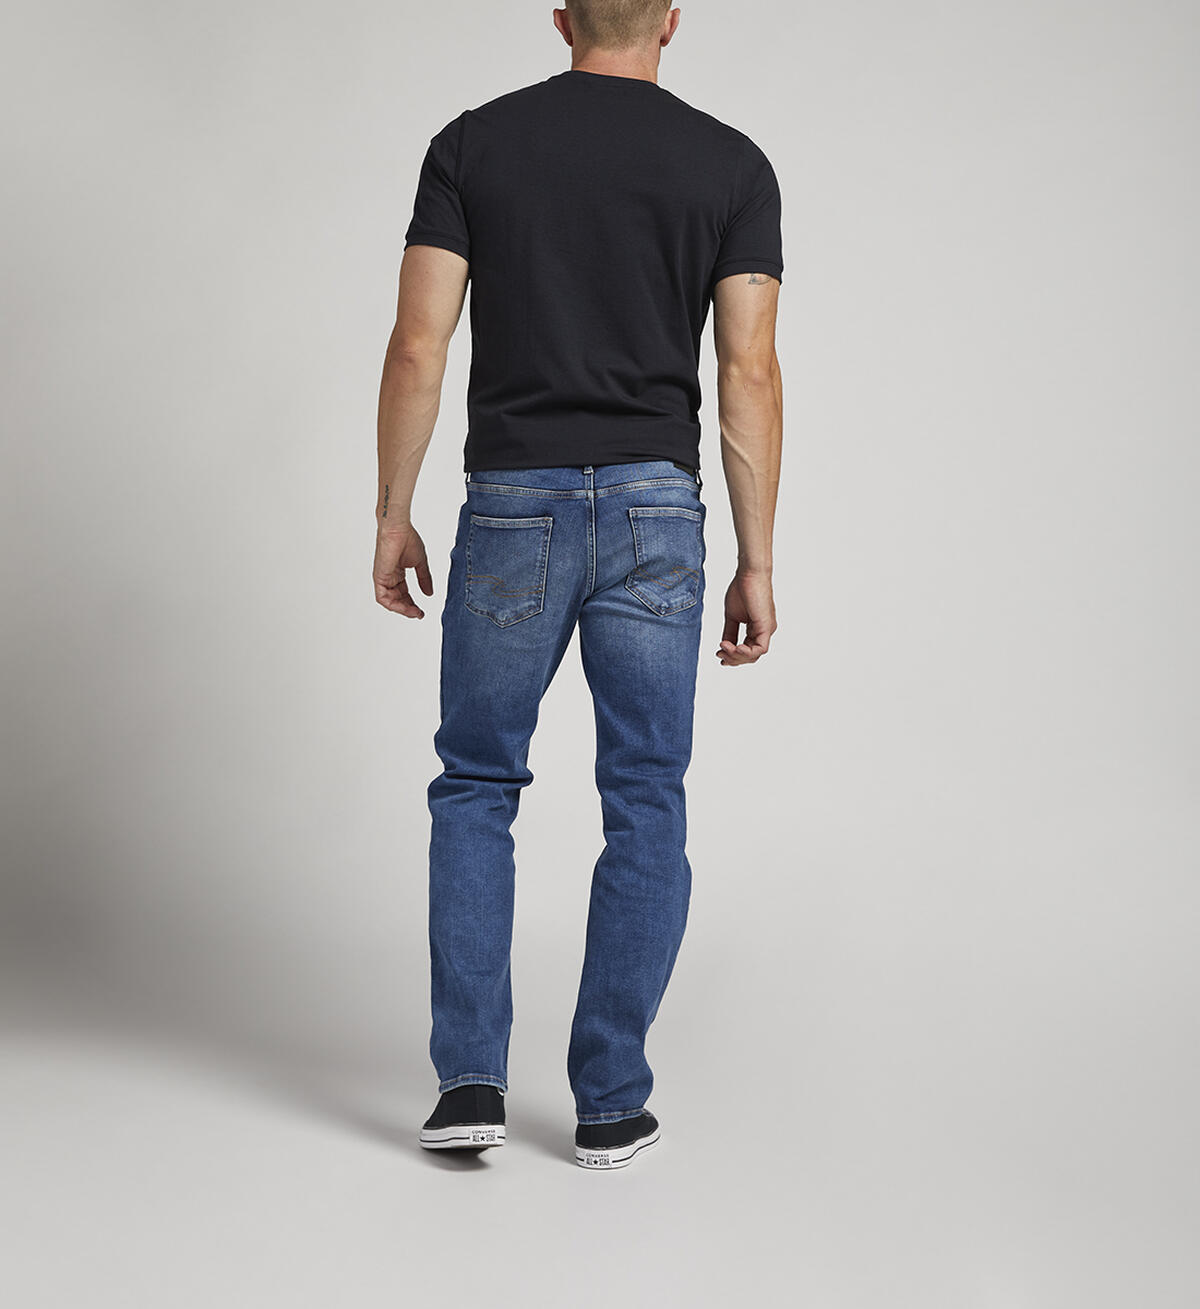 Infinite Fit Relaxed Straight Leg Jeans, Indigo, hi-res image number 1